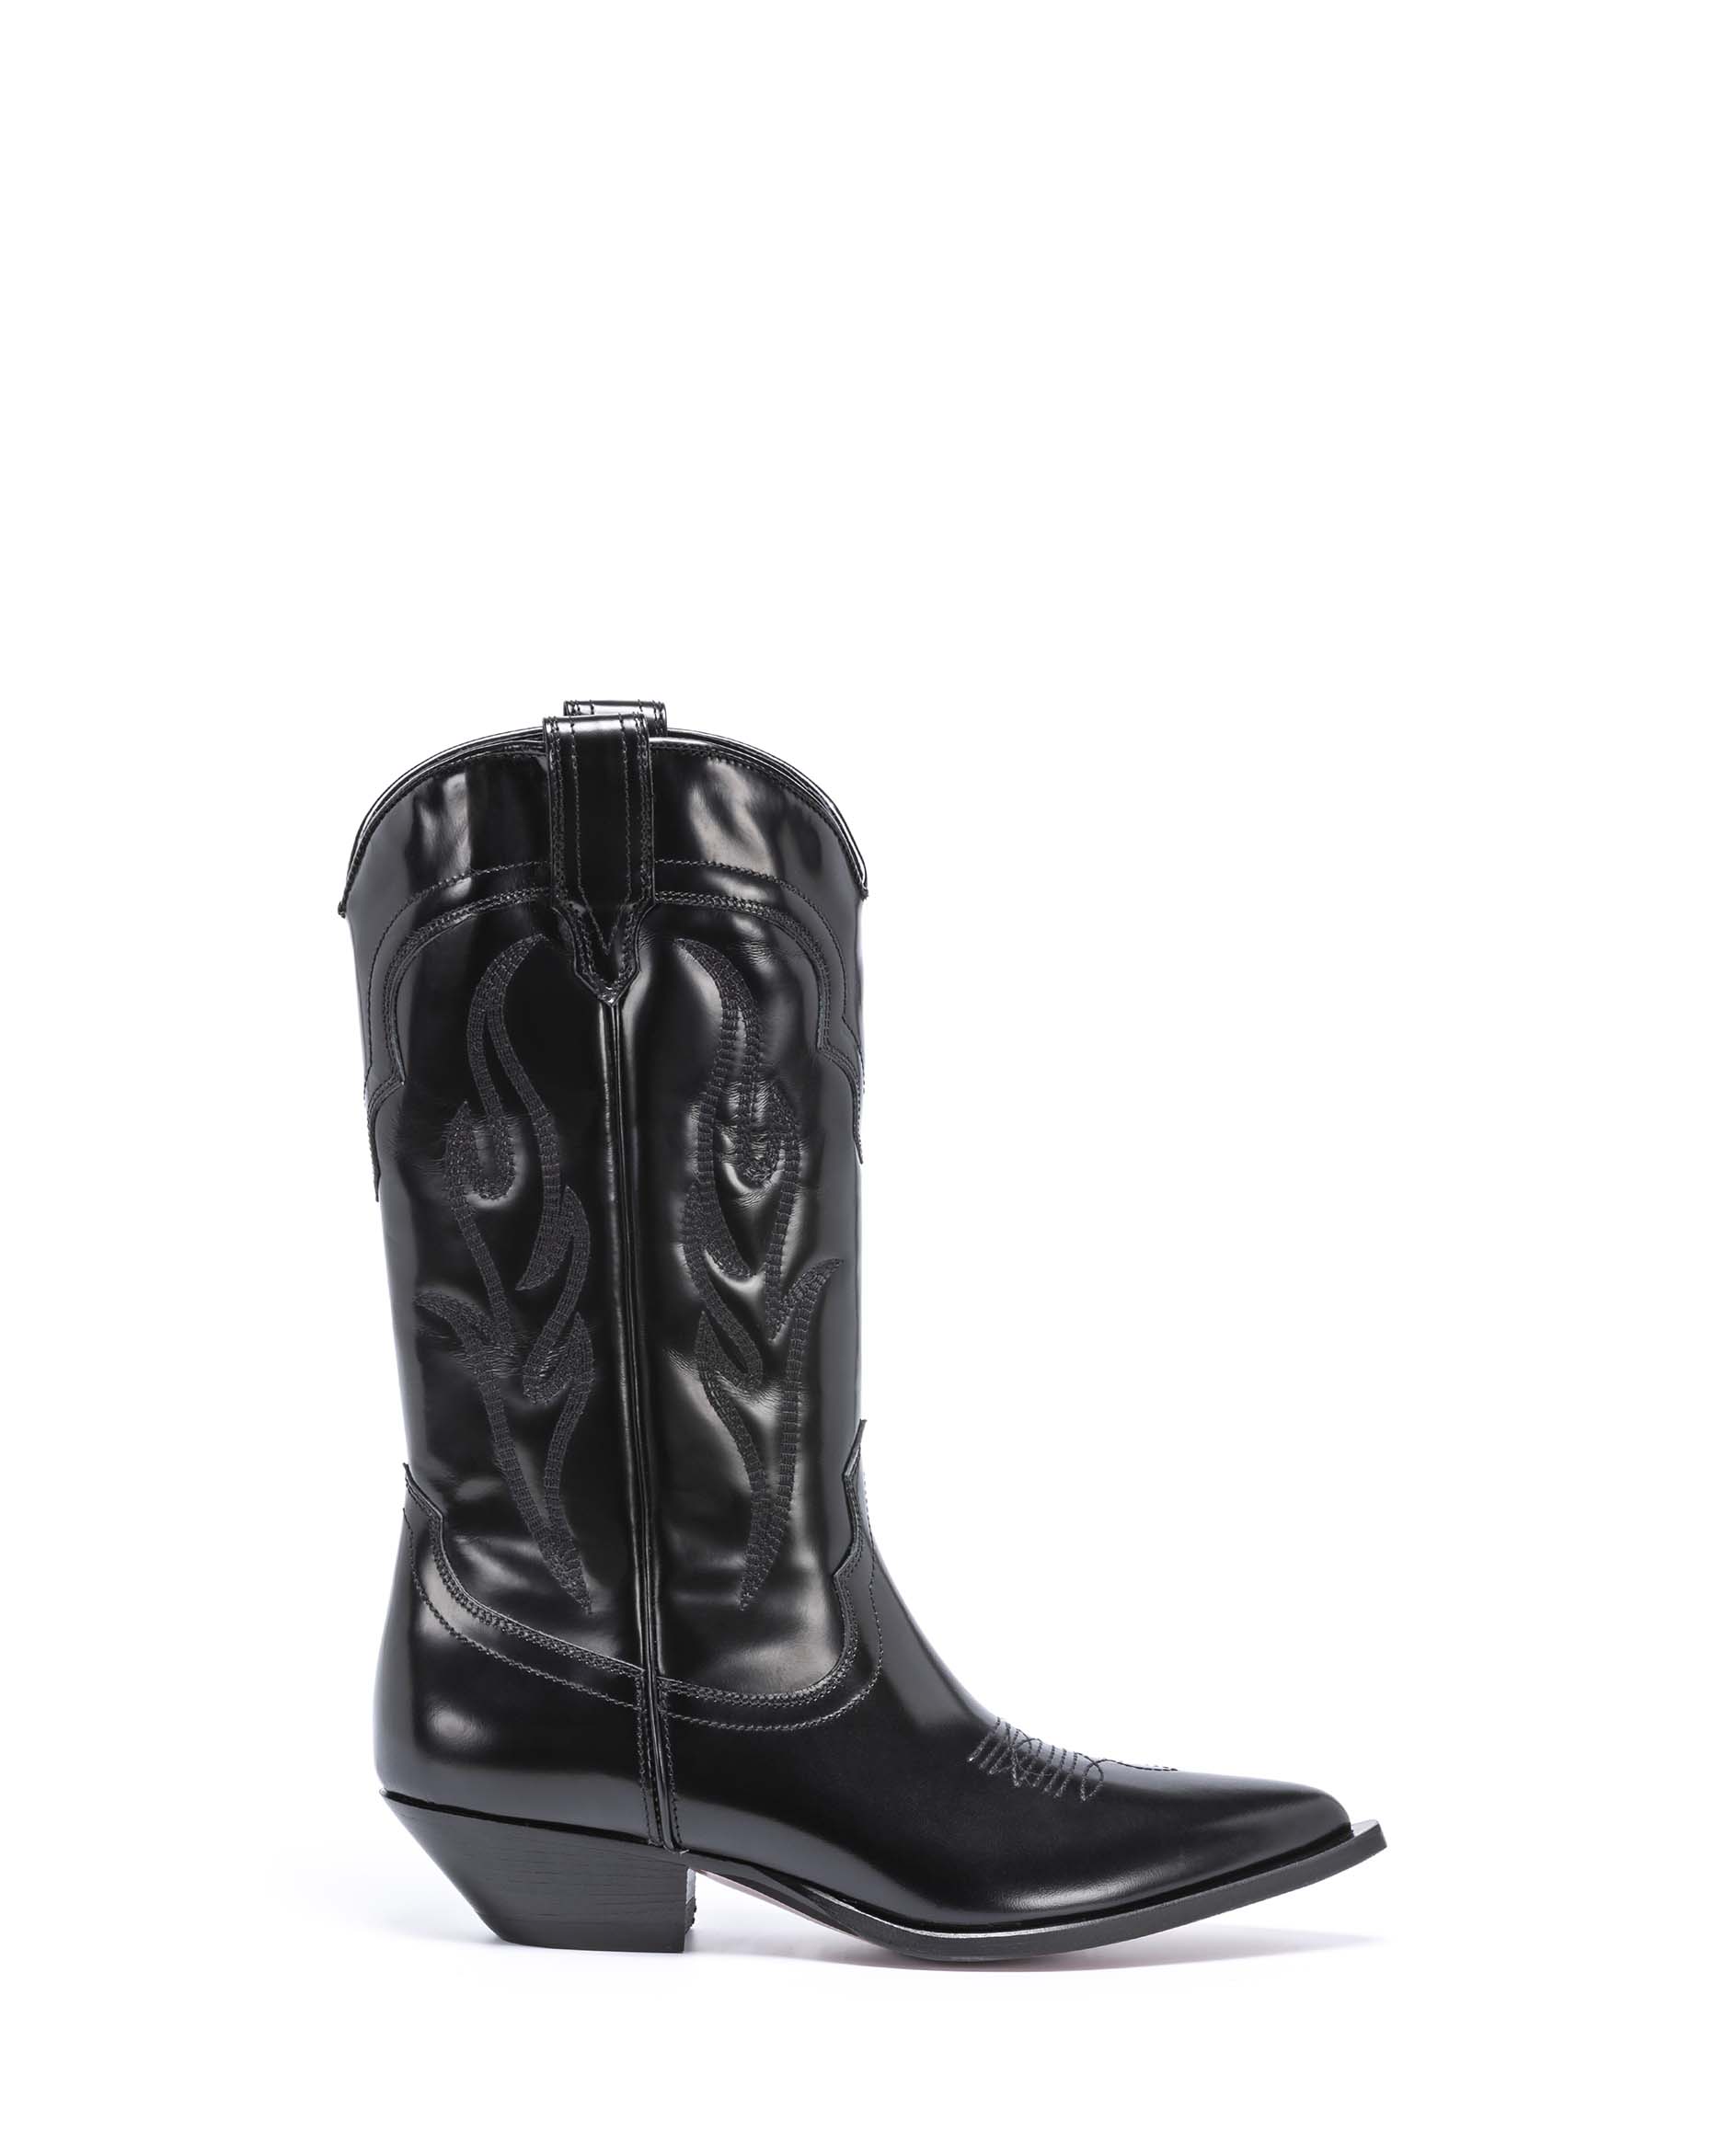 SANTA FE Women's Cowboy Boots in Black Brushed Calfskin | On Tone Embroidery_Side_02